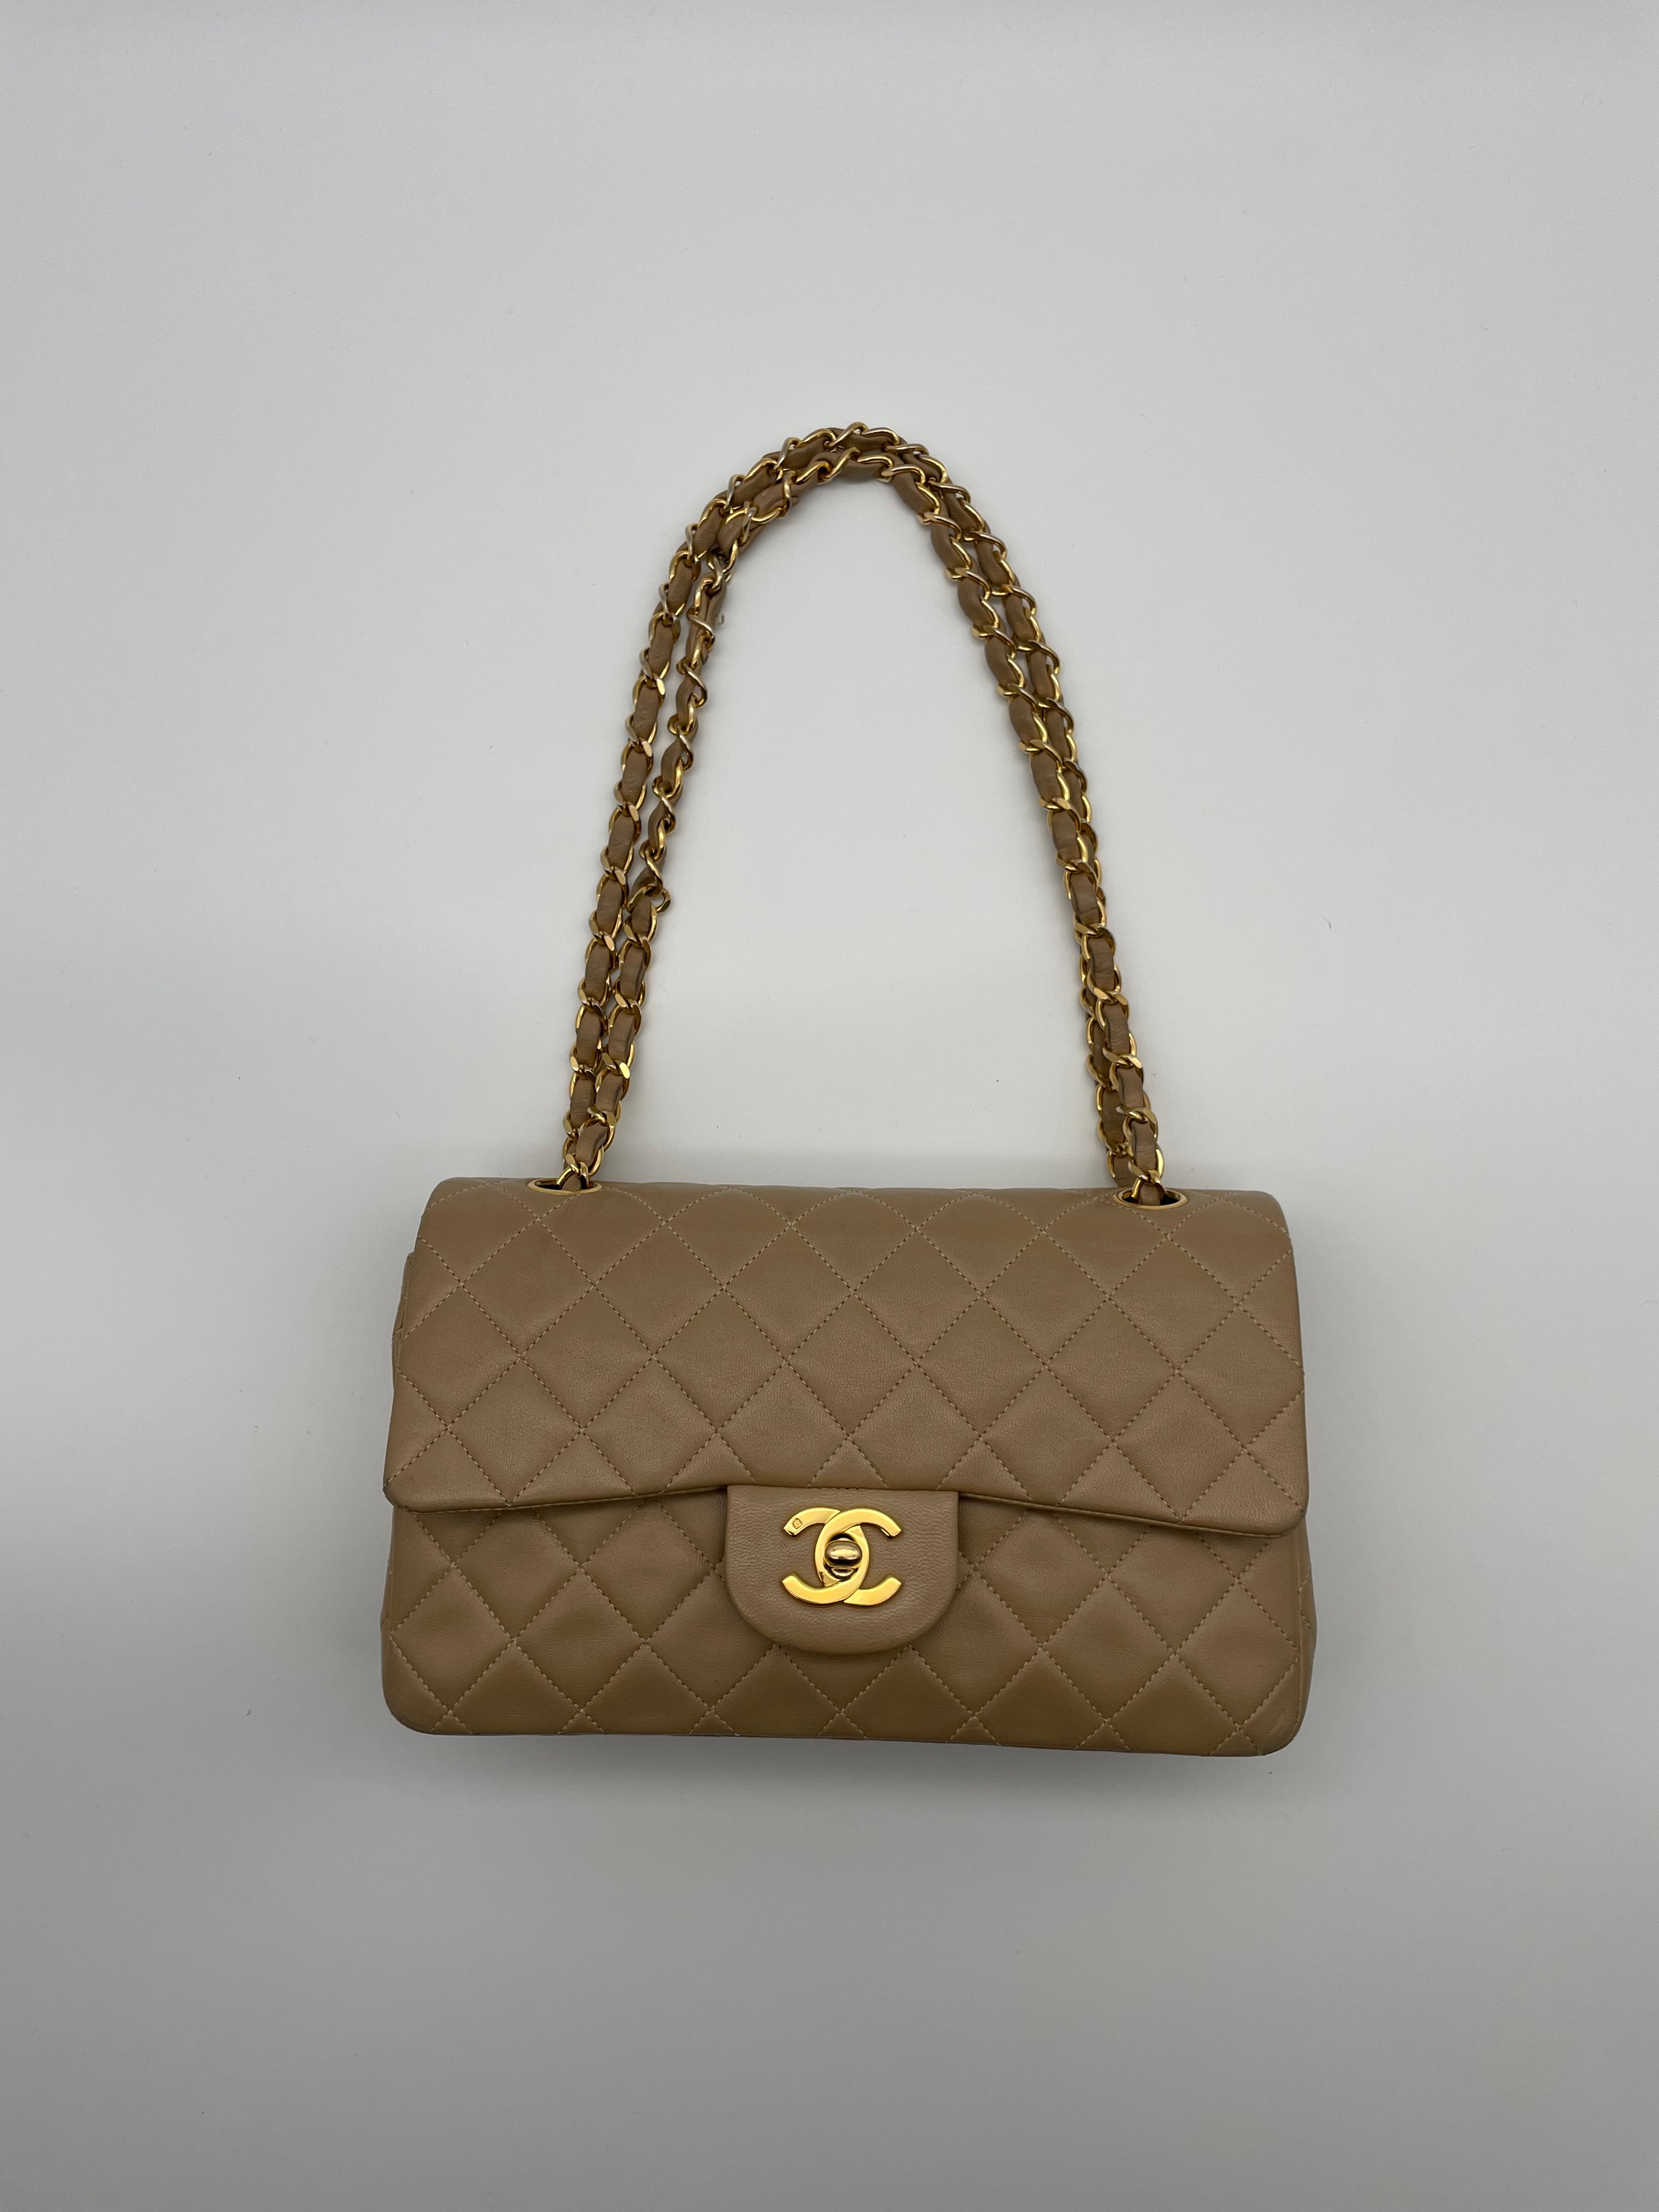 Pre-Loved Chanel Beige Small Classic Flap